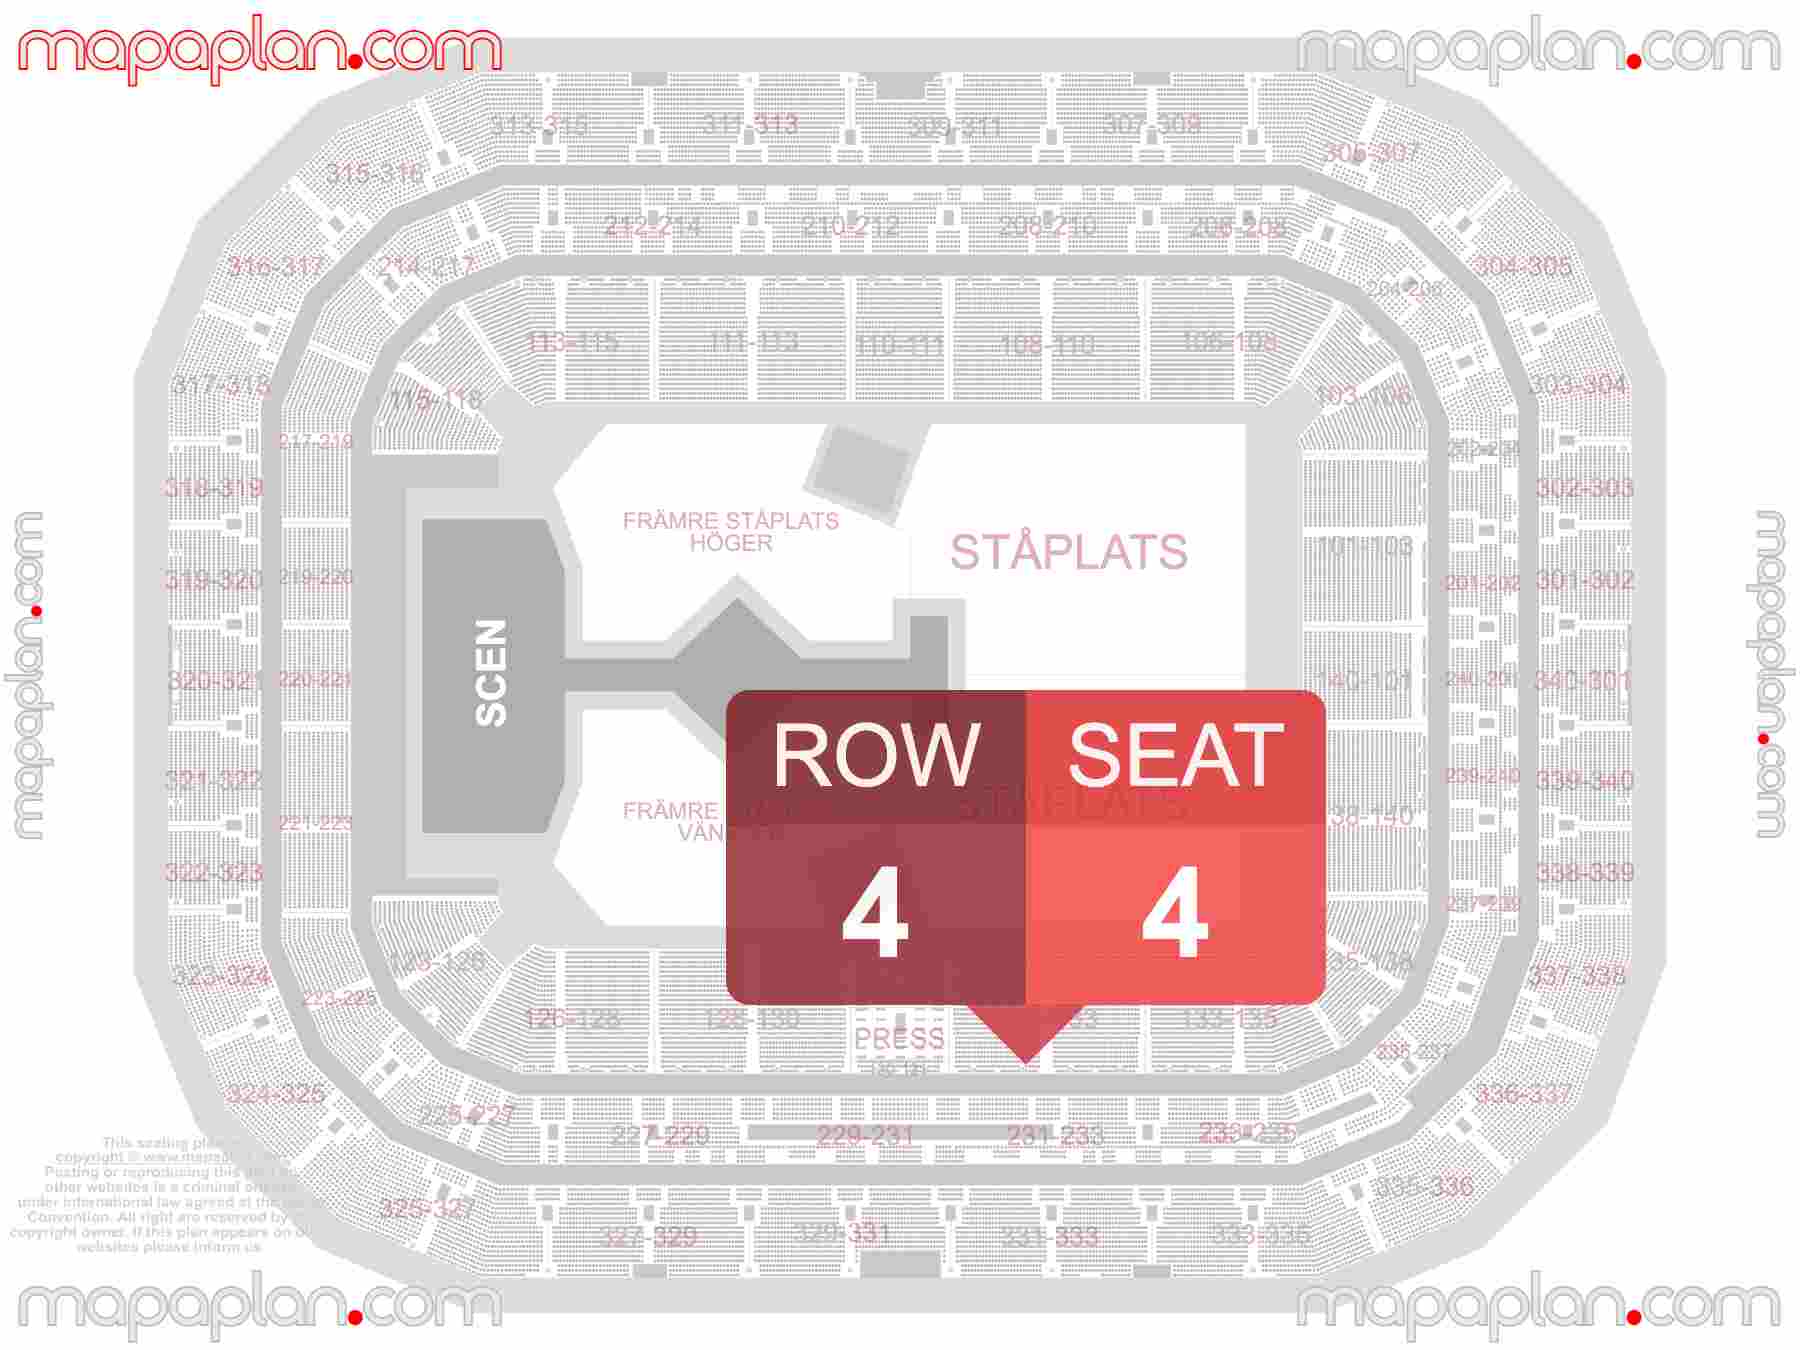 Stockholm Strawberry Friends Arena seating plan Concerts sittplan med platsnummer och radnummer inside capacity view arrangement map - Interactive virtual 3d best seats & rows detailed stadium image configuration layout